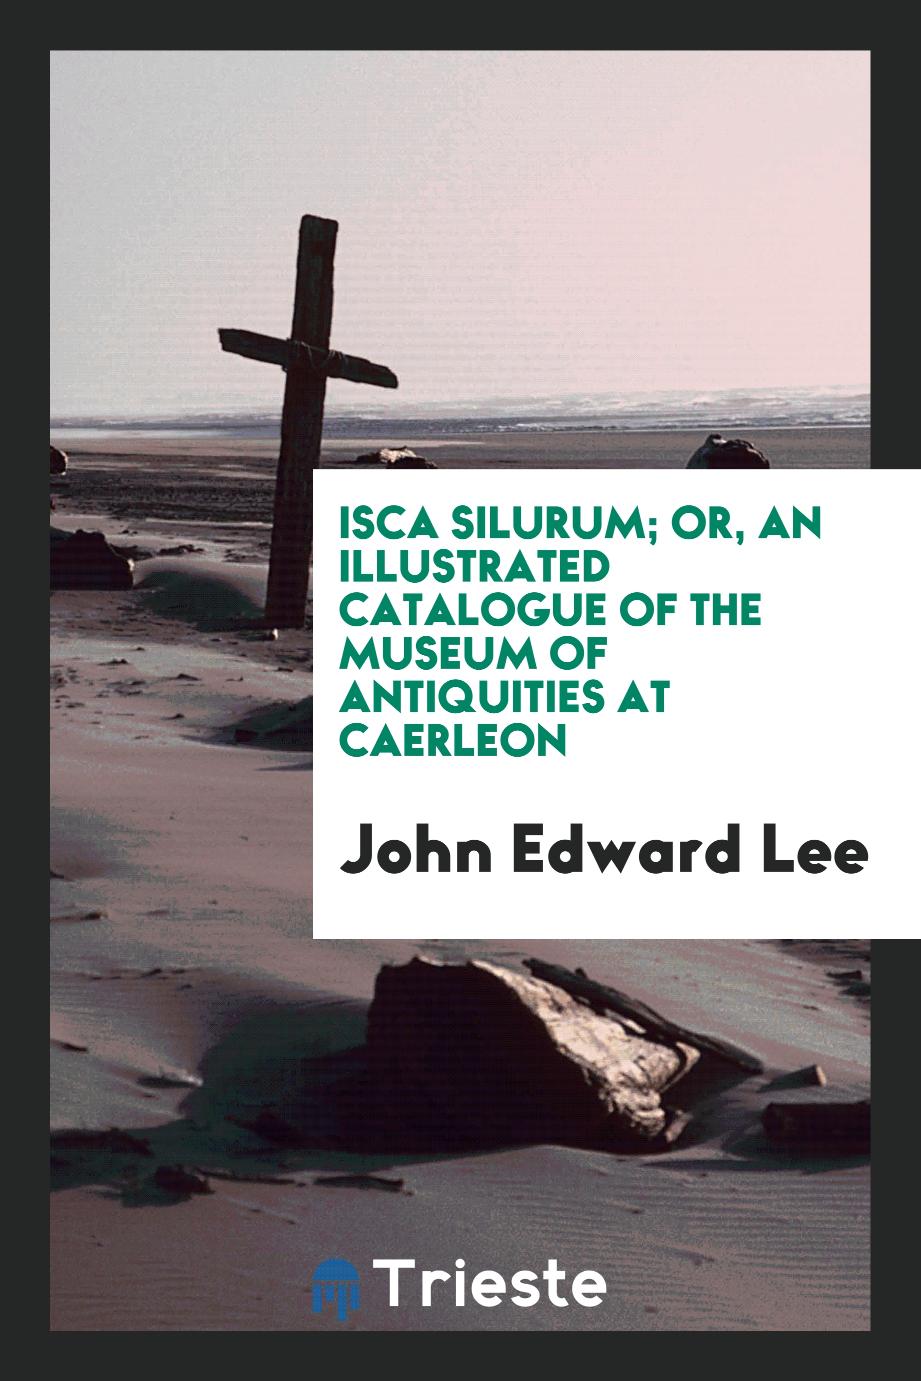 Isca Silurum; Or, An Illustrated Catalogue of the Museum of Antiquities at Caerleon